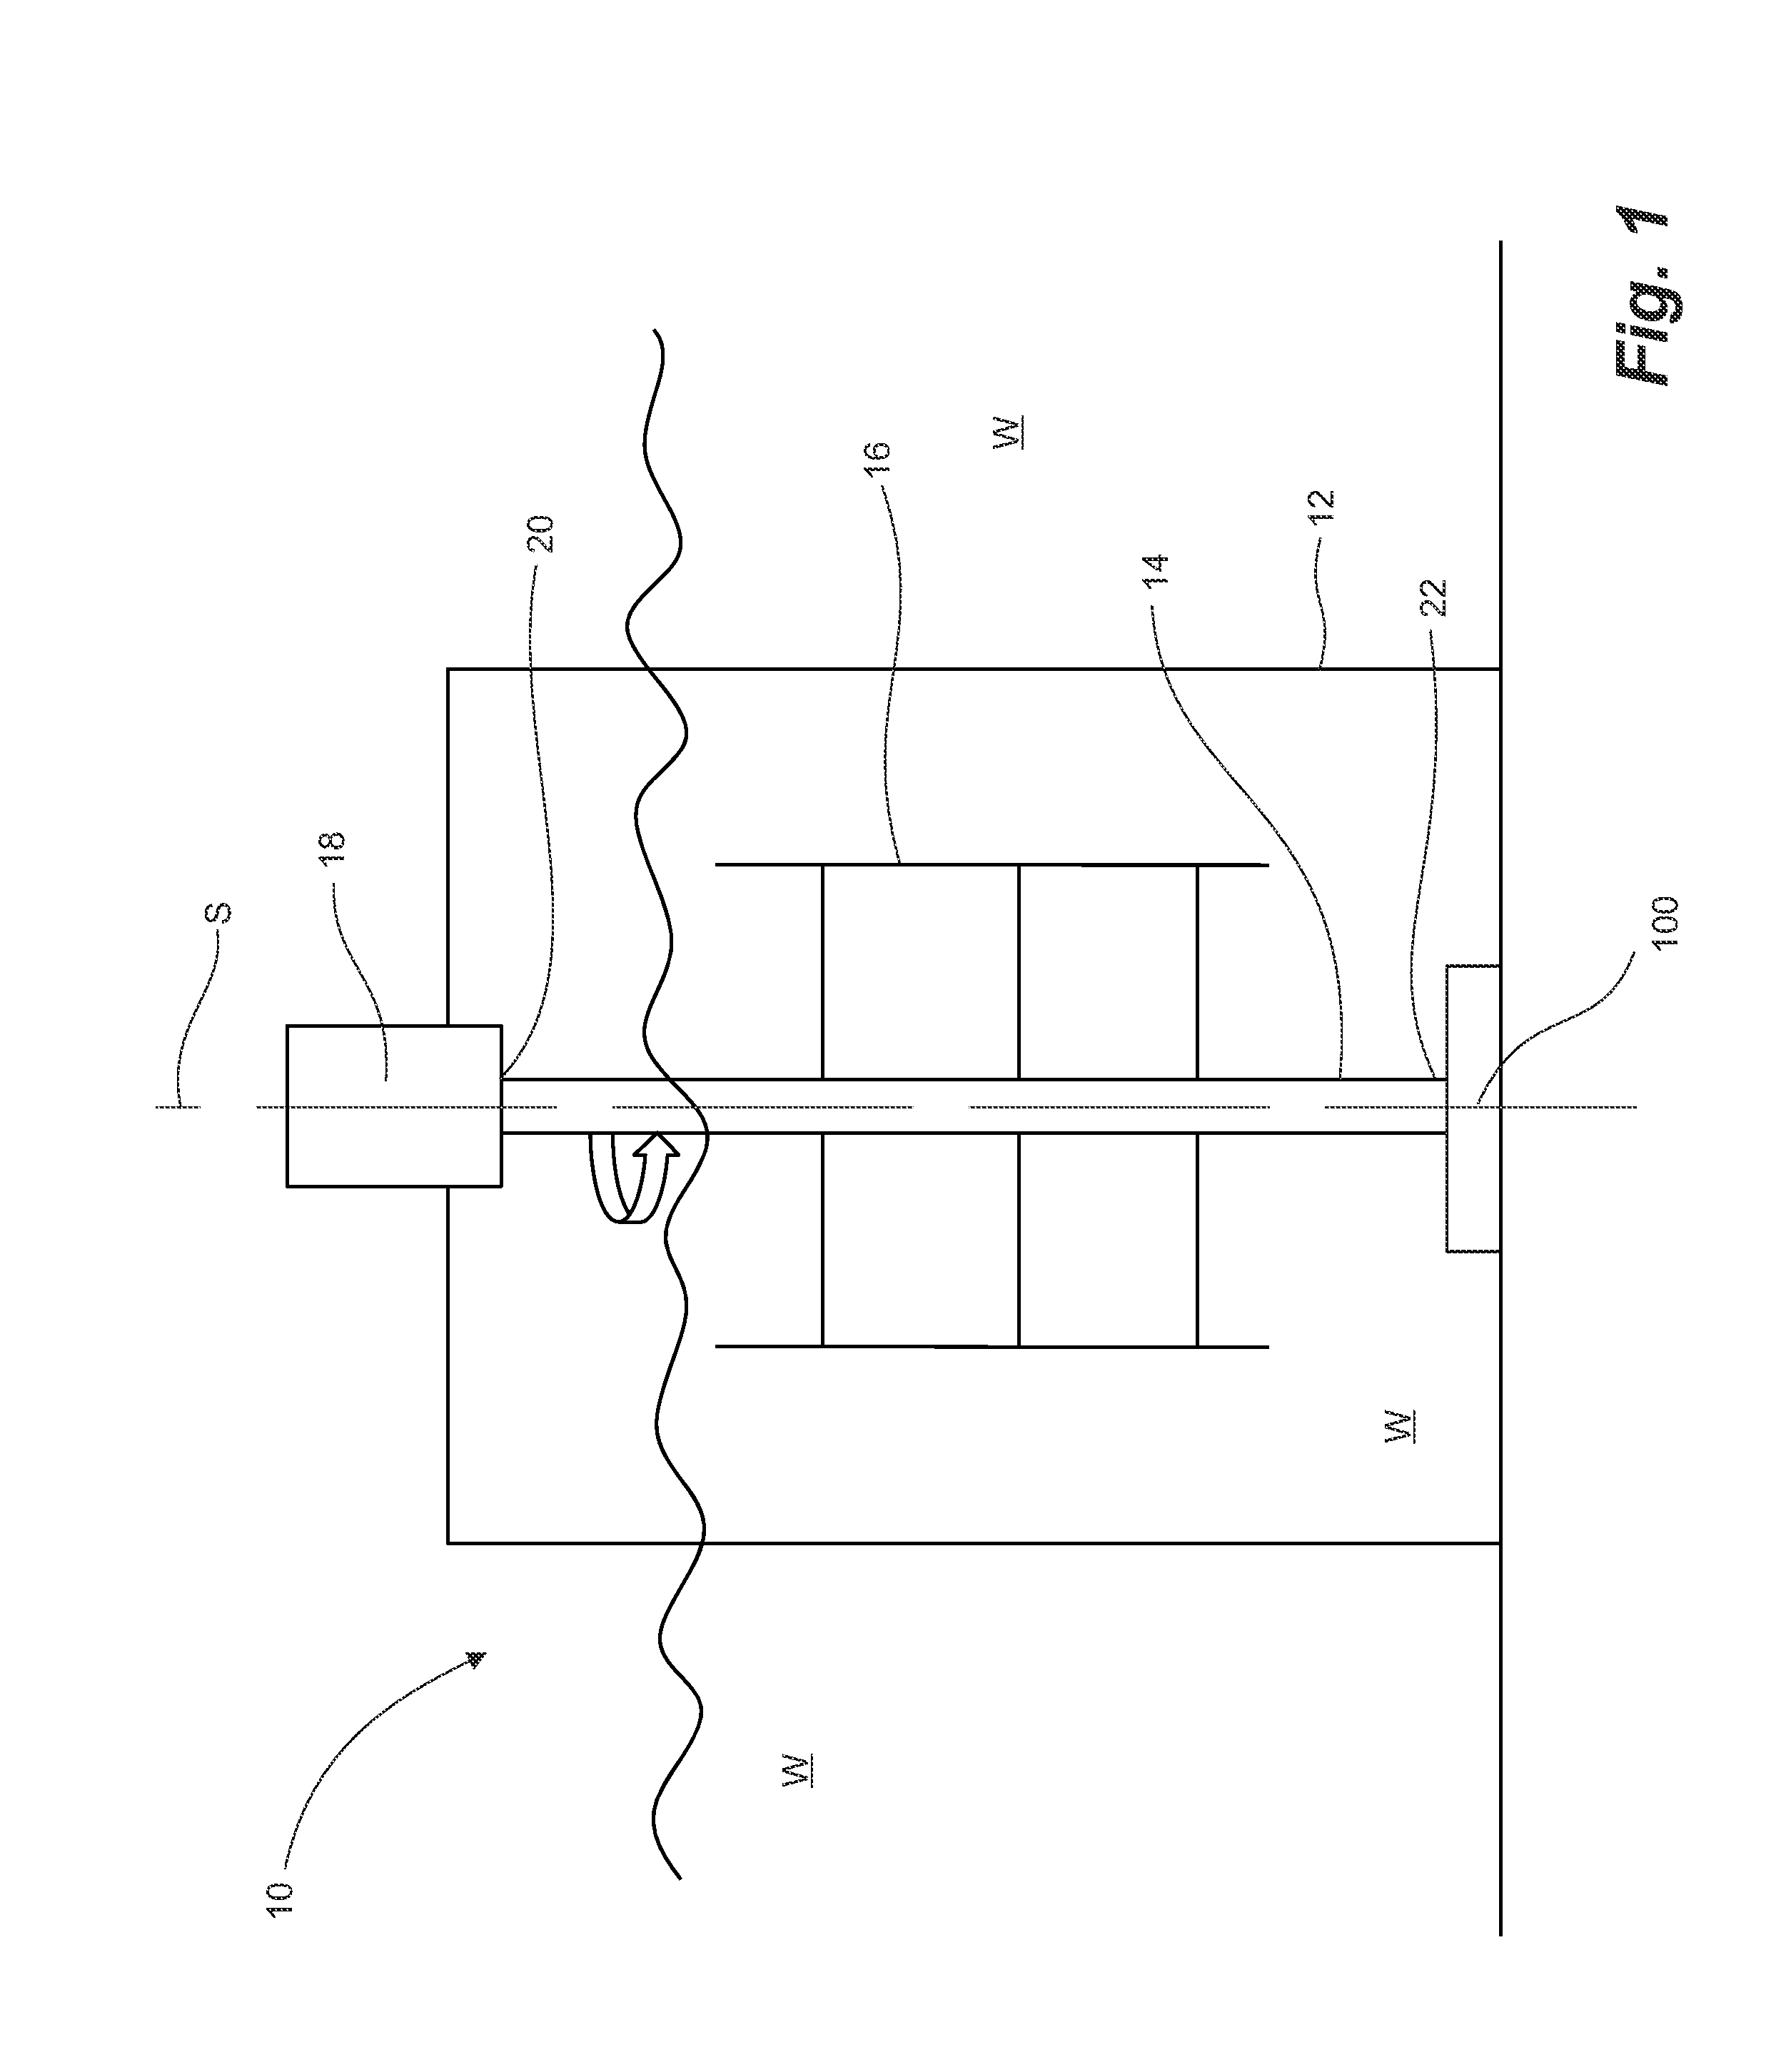 PDC bearing for use in a fluid environment